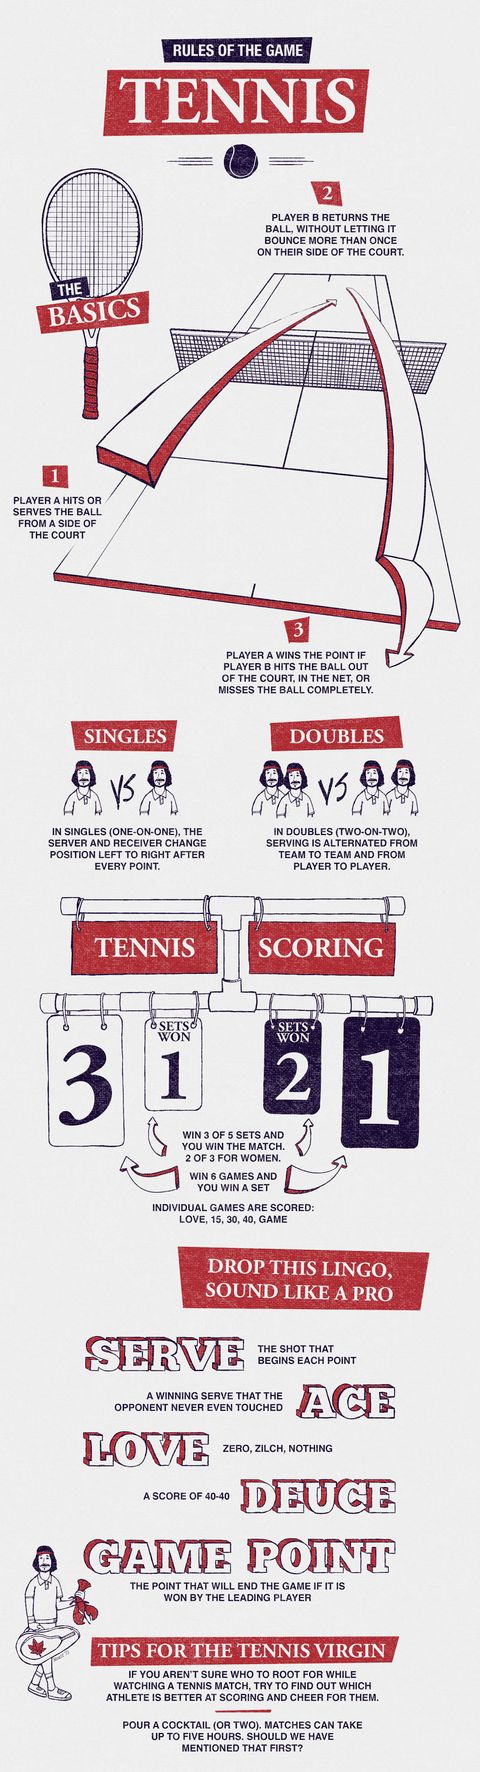 tennis-rules-calling-a-ball-out-and-some-etiquette-to-know-the